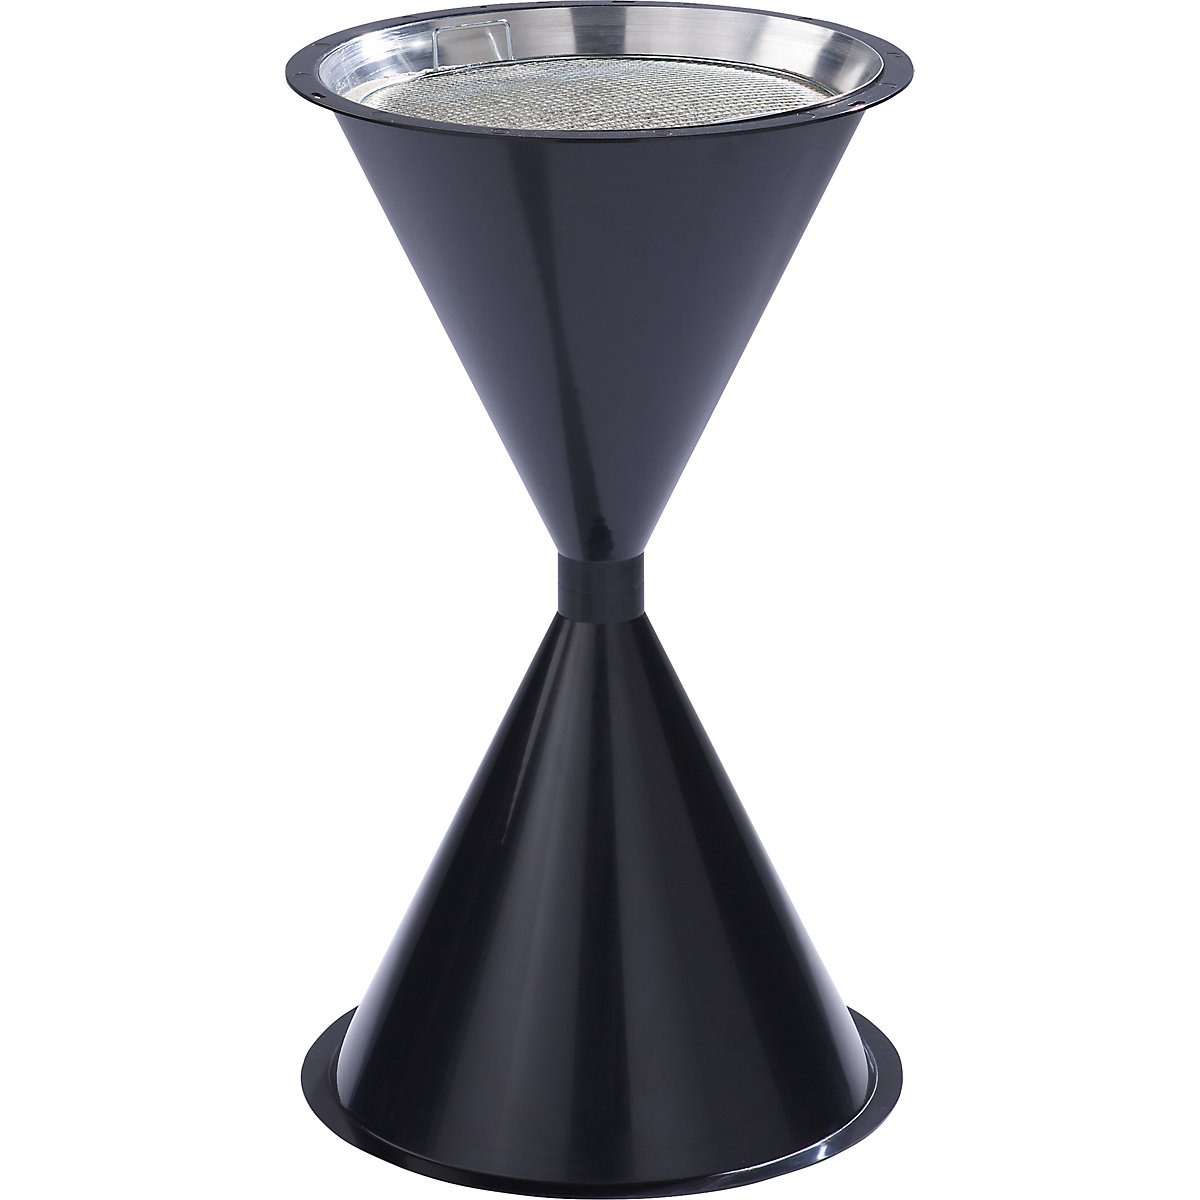 VAR – Conical pedestal ashtray made of plastic, without hood, black grey